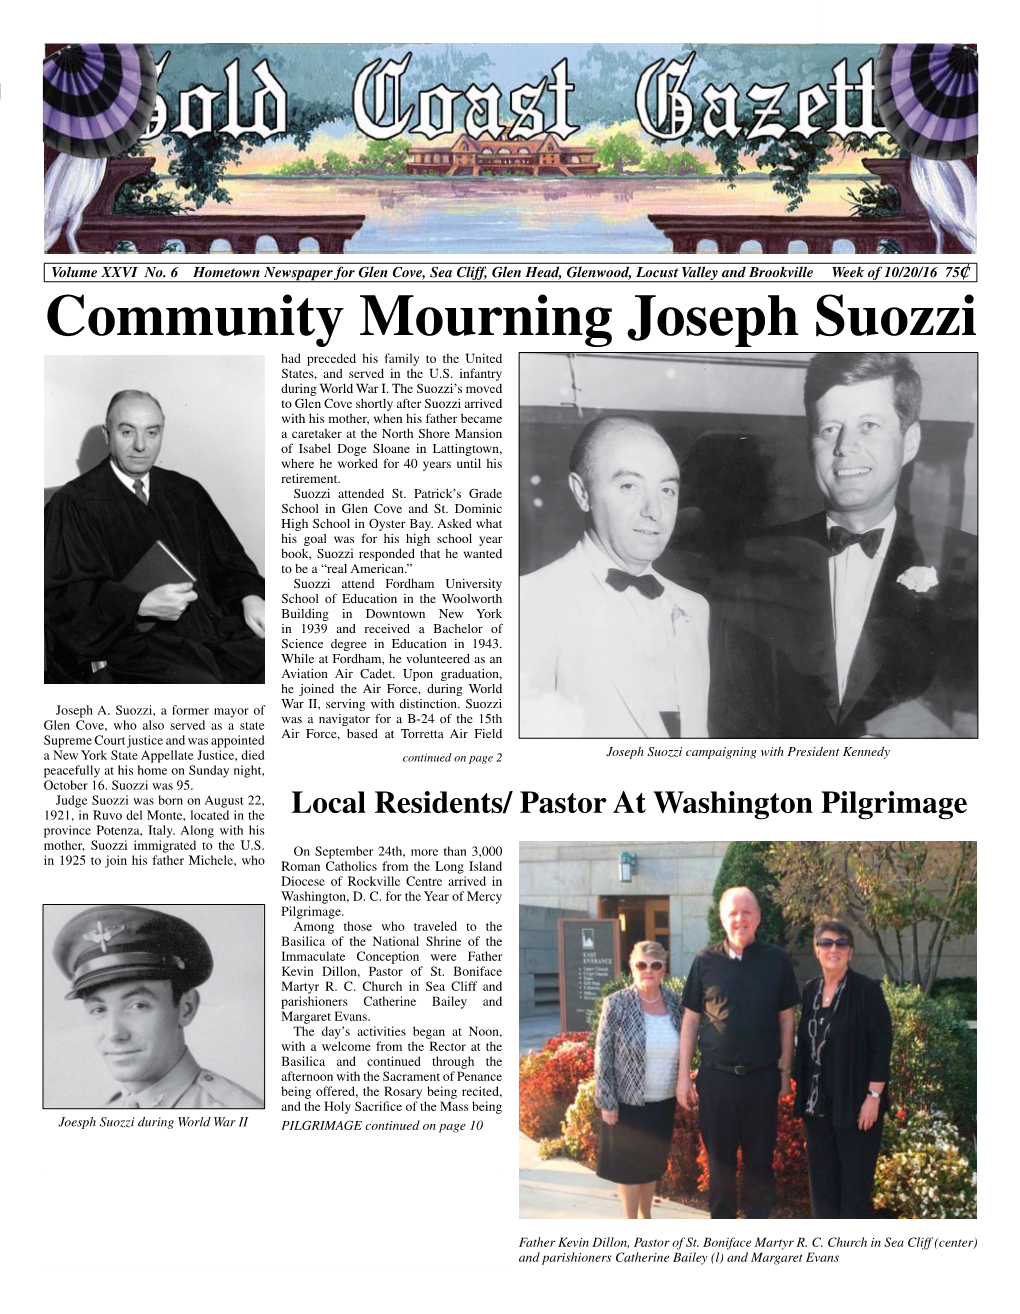 Community Mourning Joseph Suozzi Had Preceded His Family to the United States, and Served in the U.S